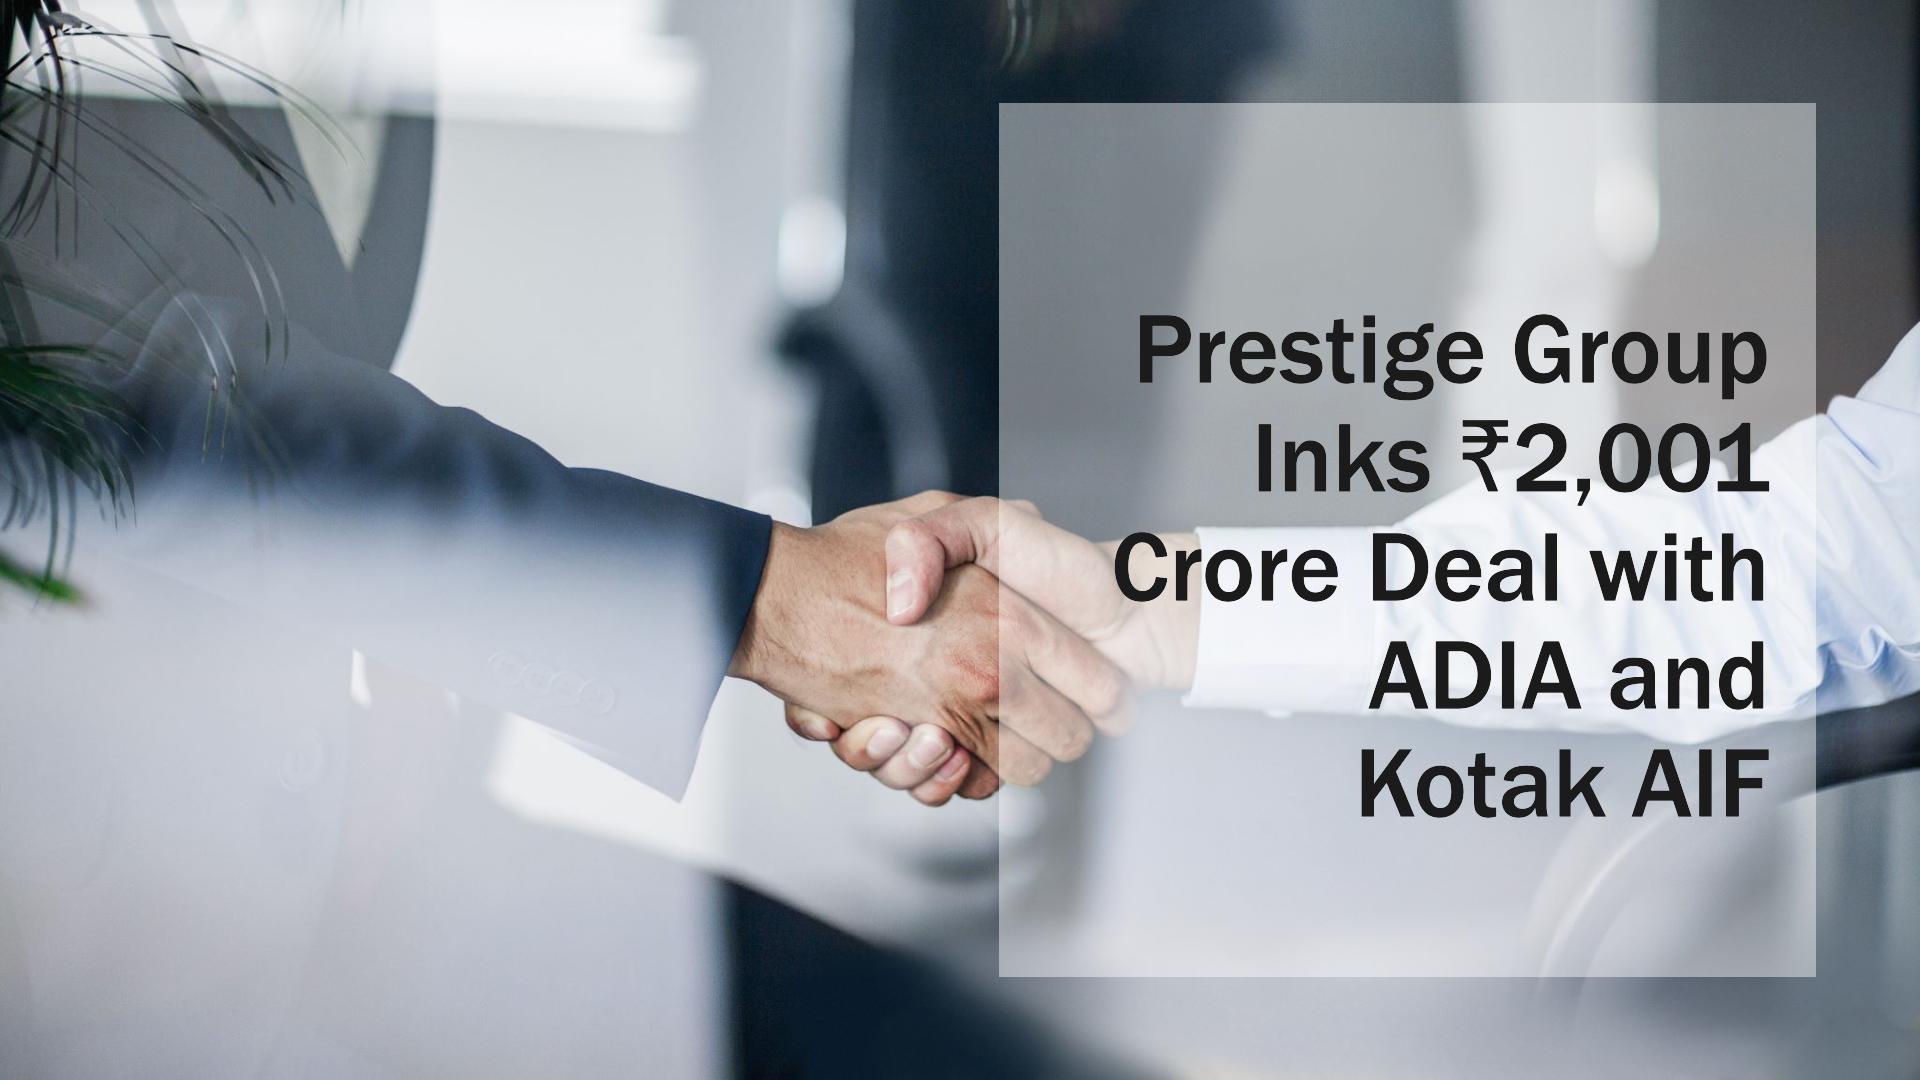 Prestige Group Inks ₹2,001 Crore Deal with ADIA and Kotak AIF